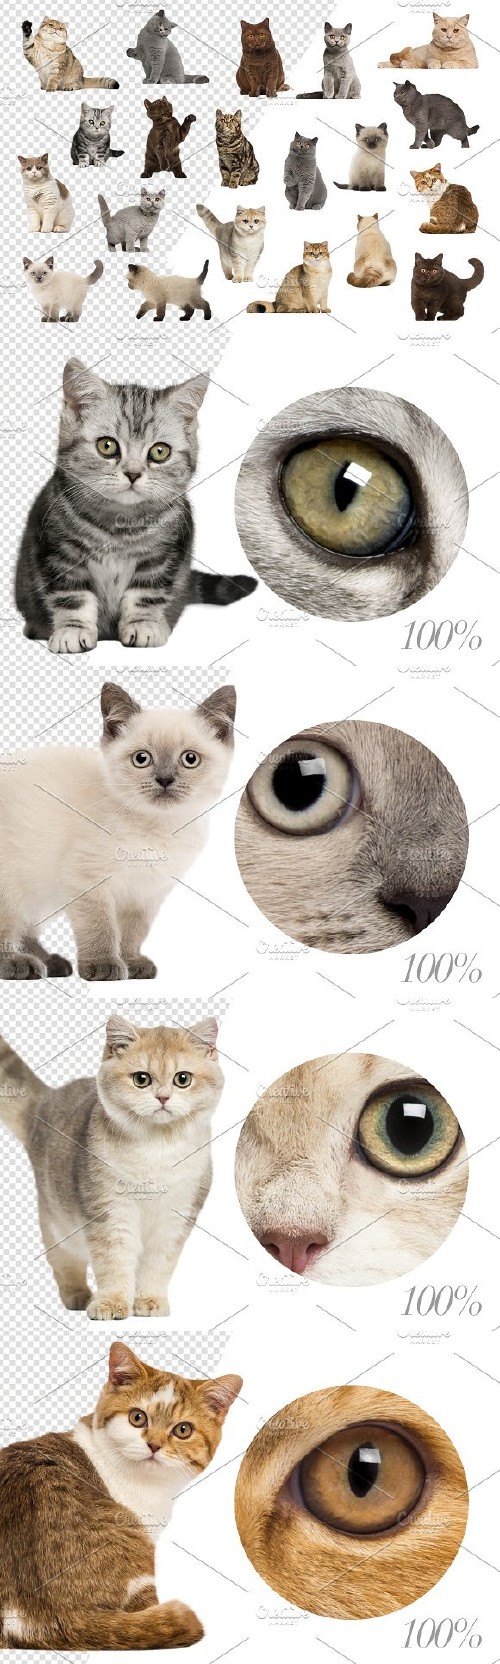 20 British Shorthairs - Cut-out Pics 2293260